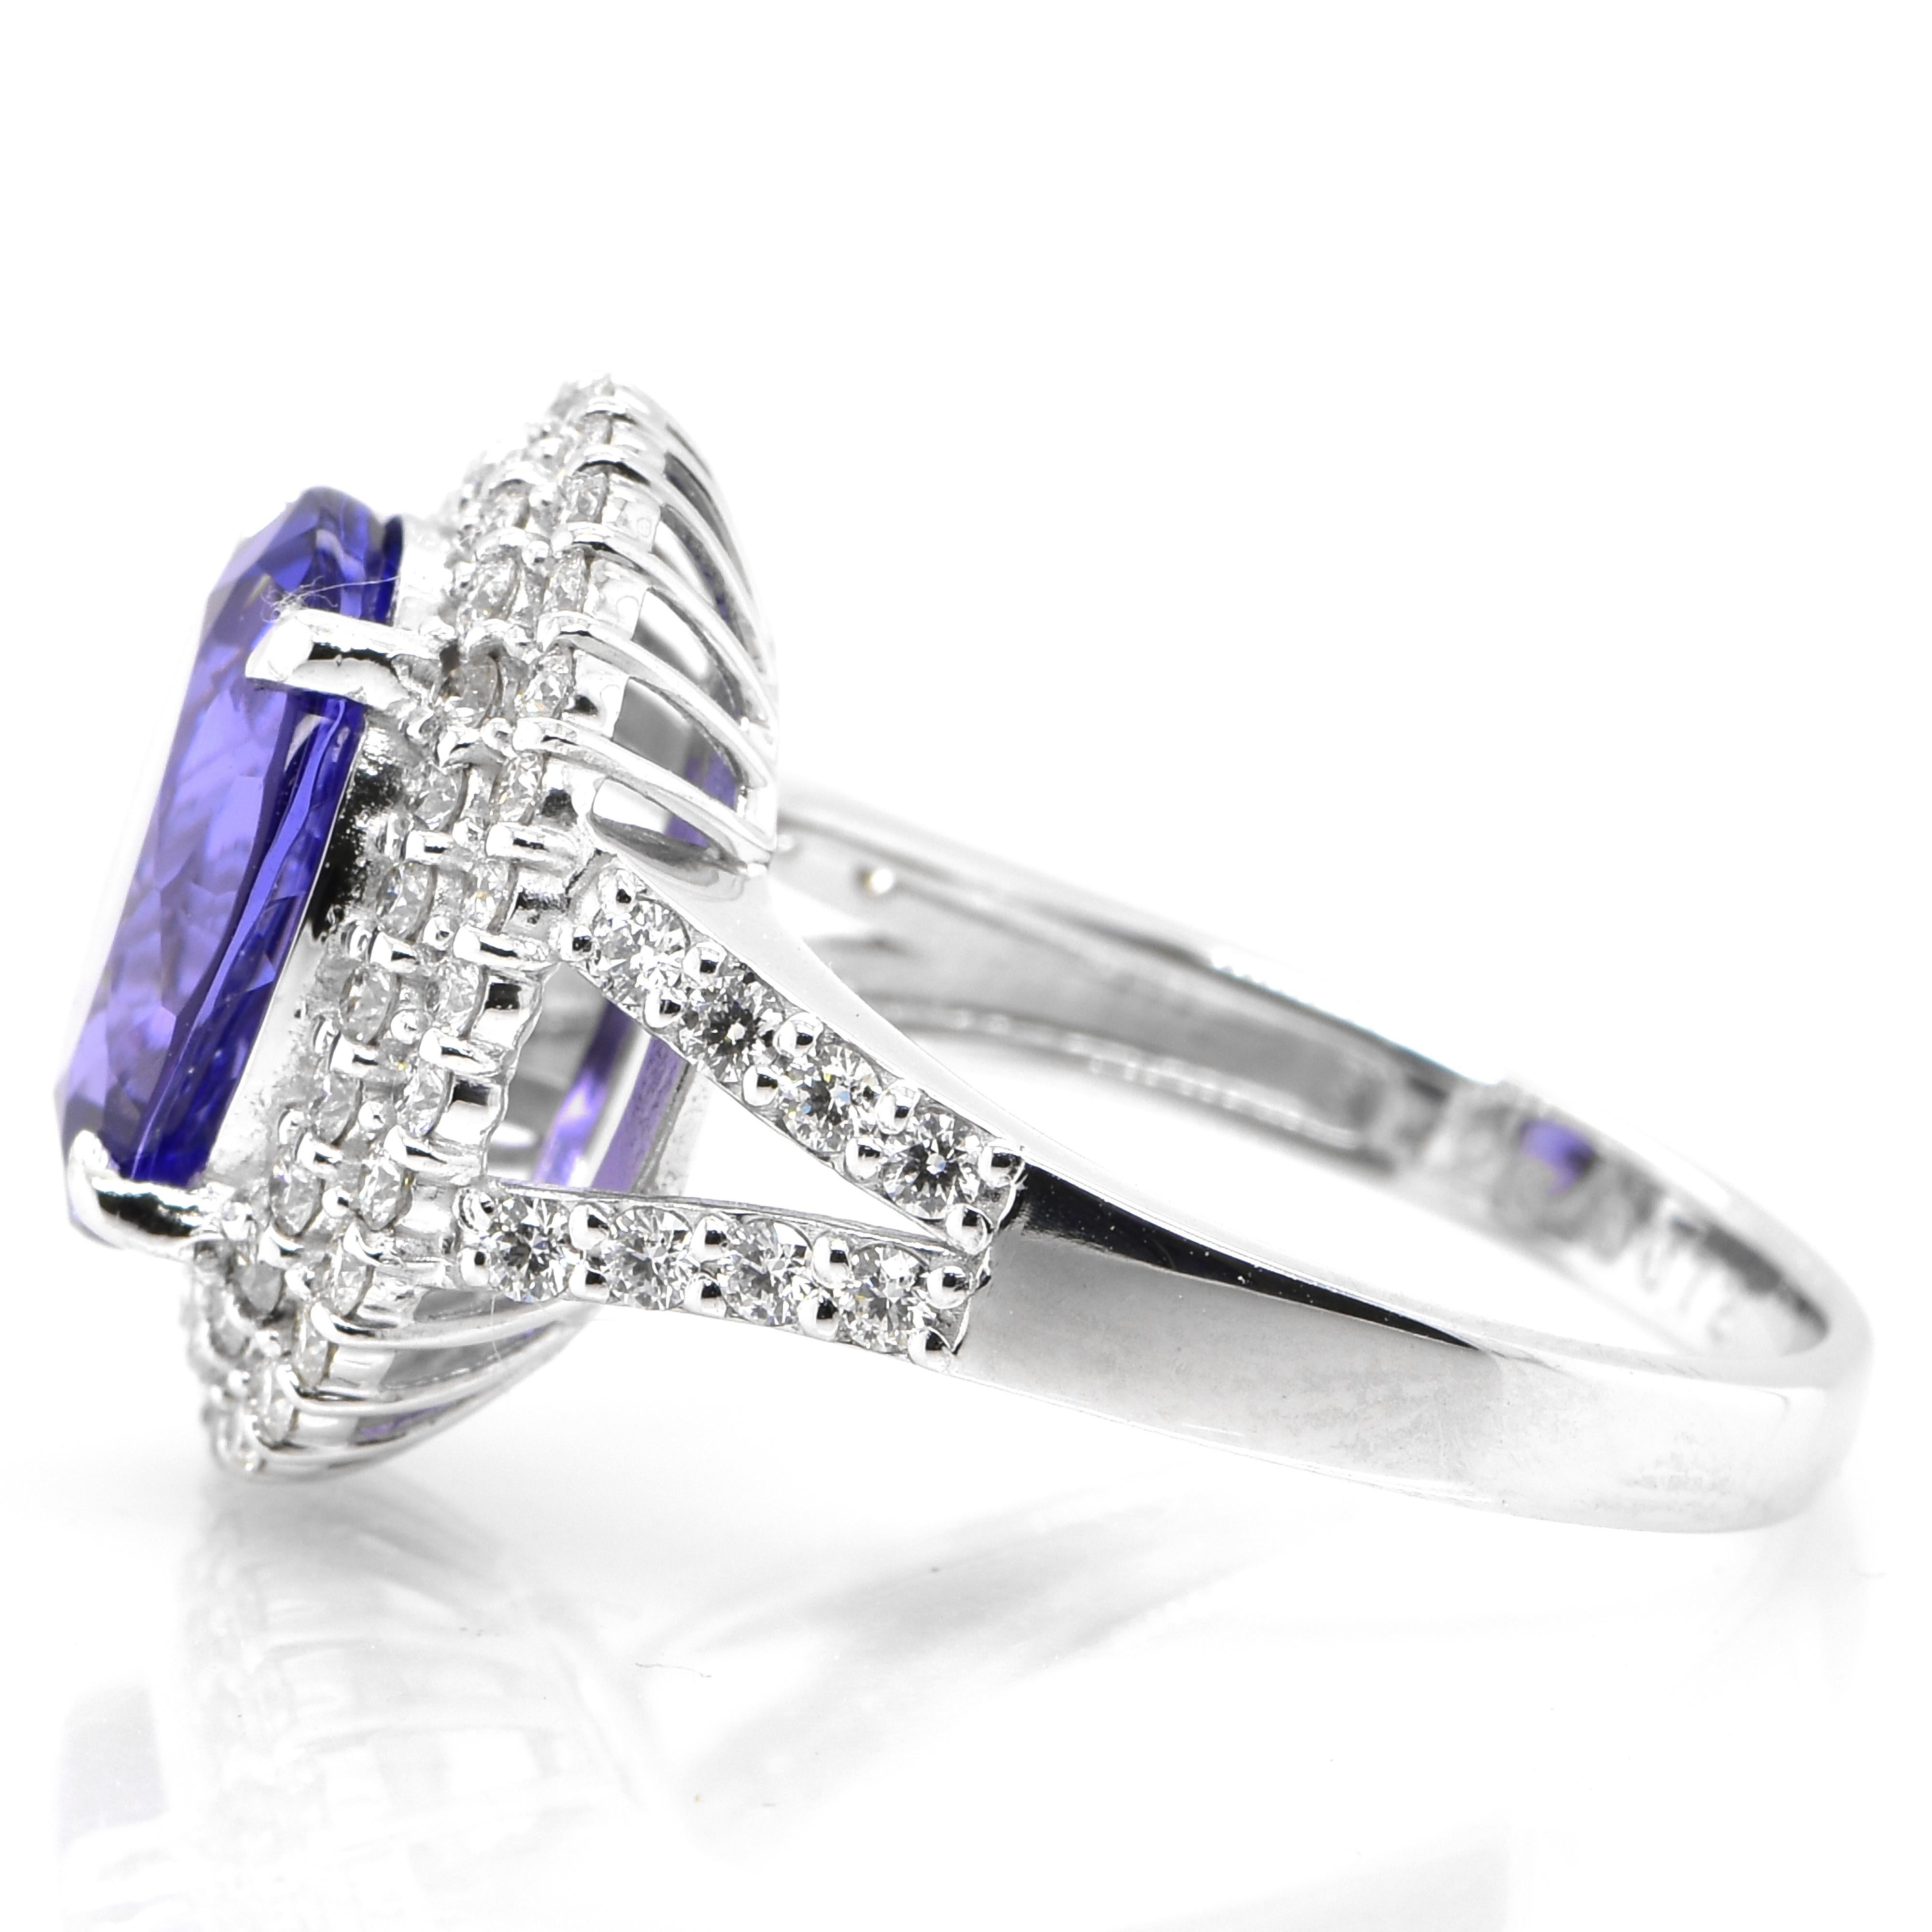 Oval Cut 4.26 Carat Natural Tanzanite and Diamond Cocktail Ring Set in Platinum For Sale